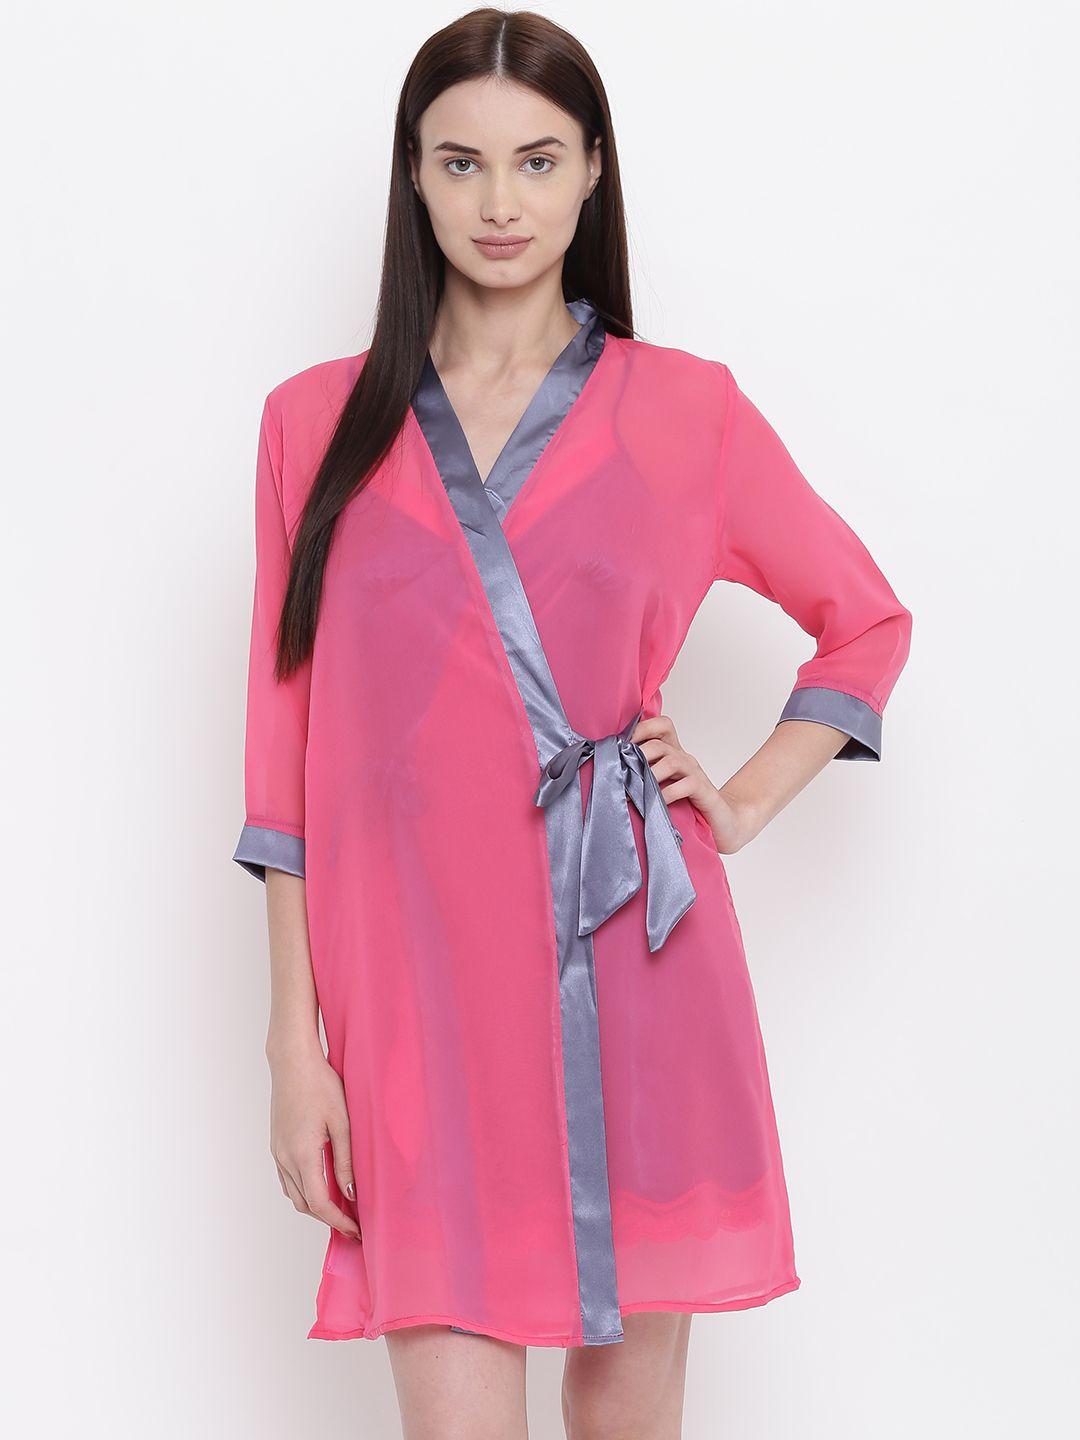 sweet dreams charcoal grey & pink above knee solid satin finish nightdress with robe